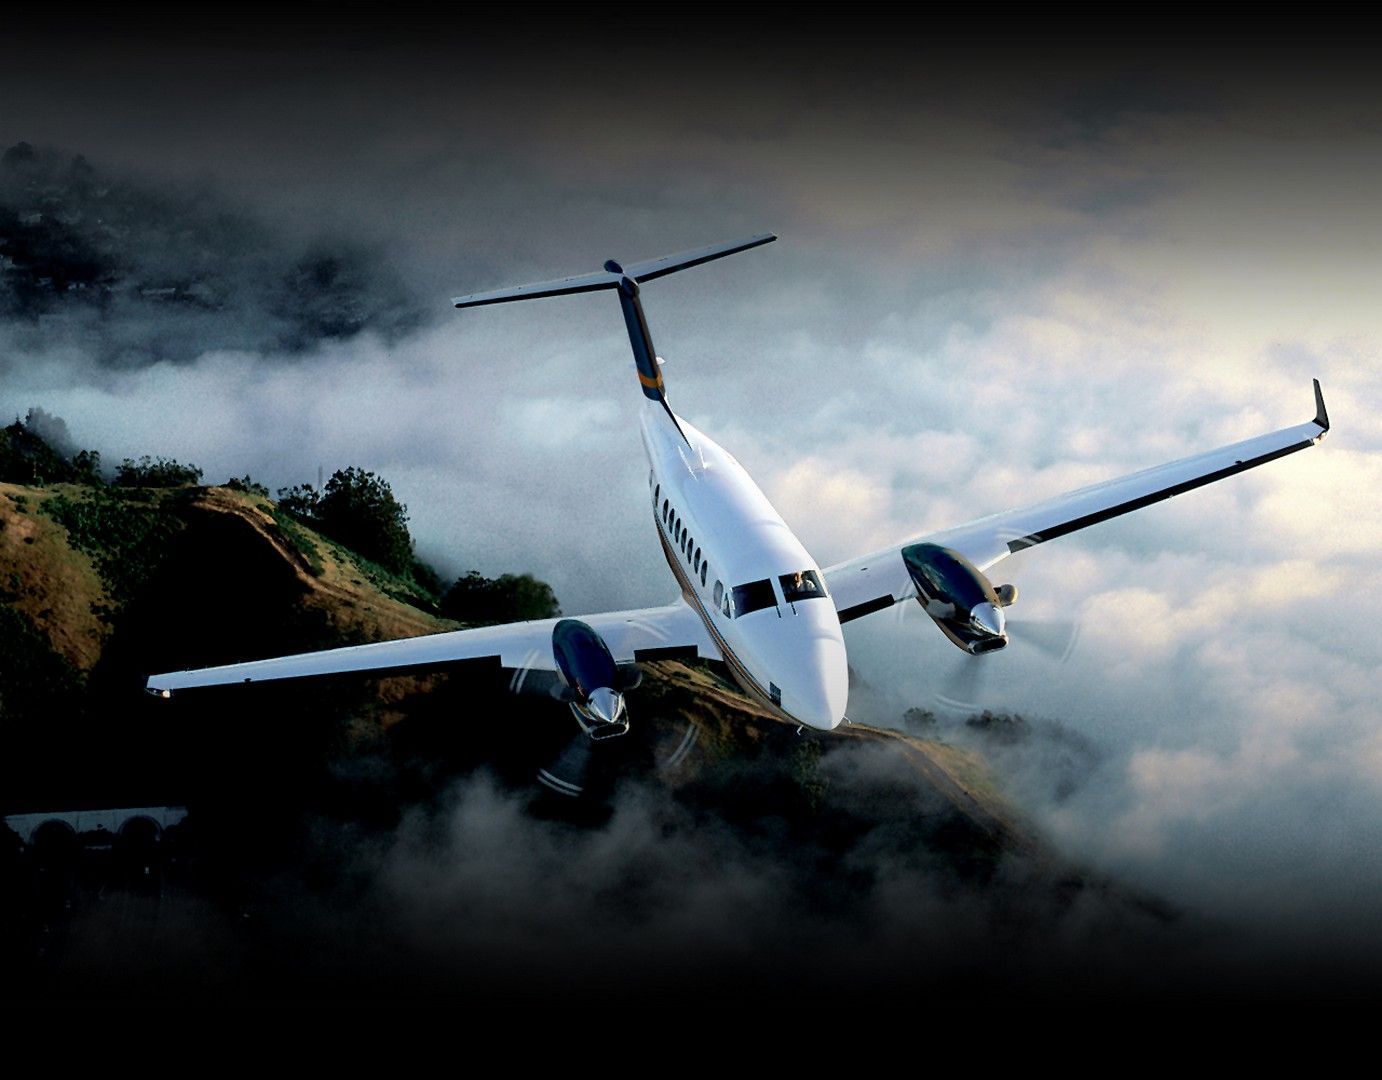 HD Beech 80 Queen Air (Beech) wallpaper. Aviation airplane, Small airplanes, Airplane painting